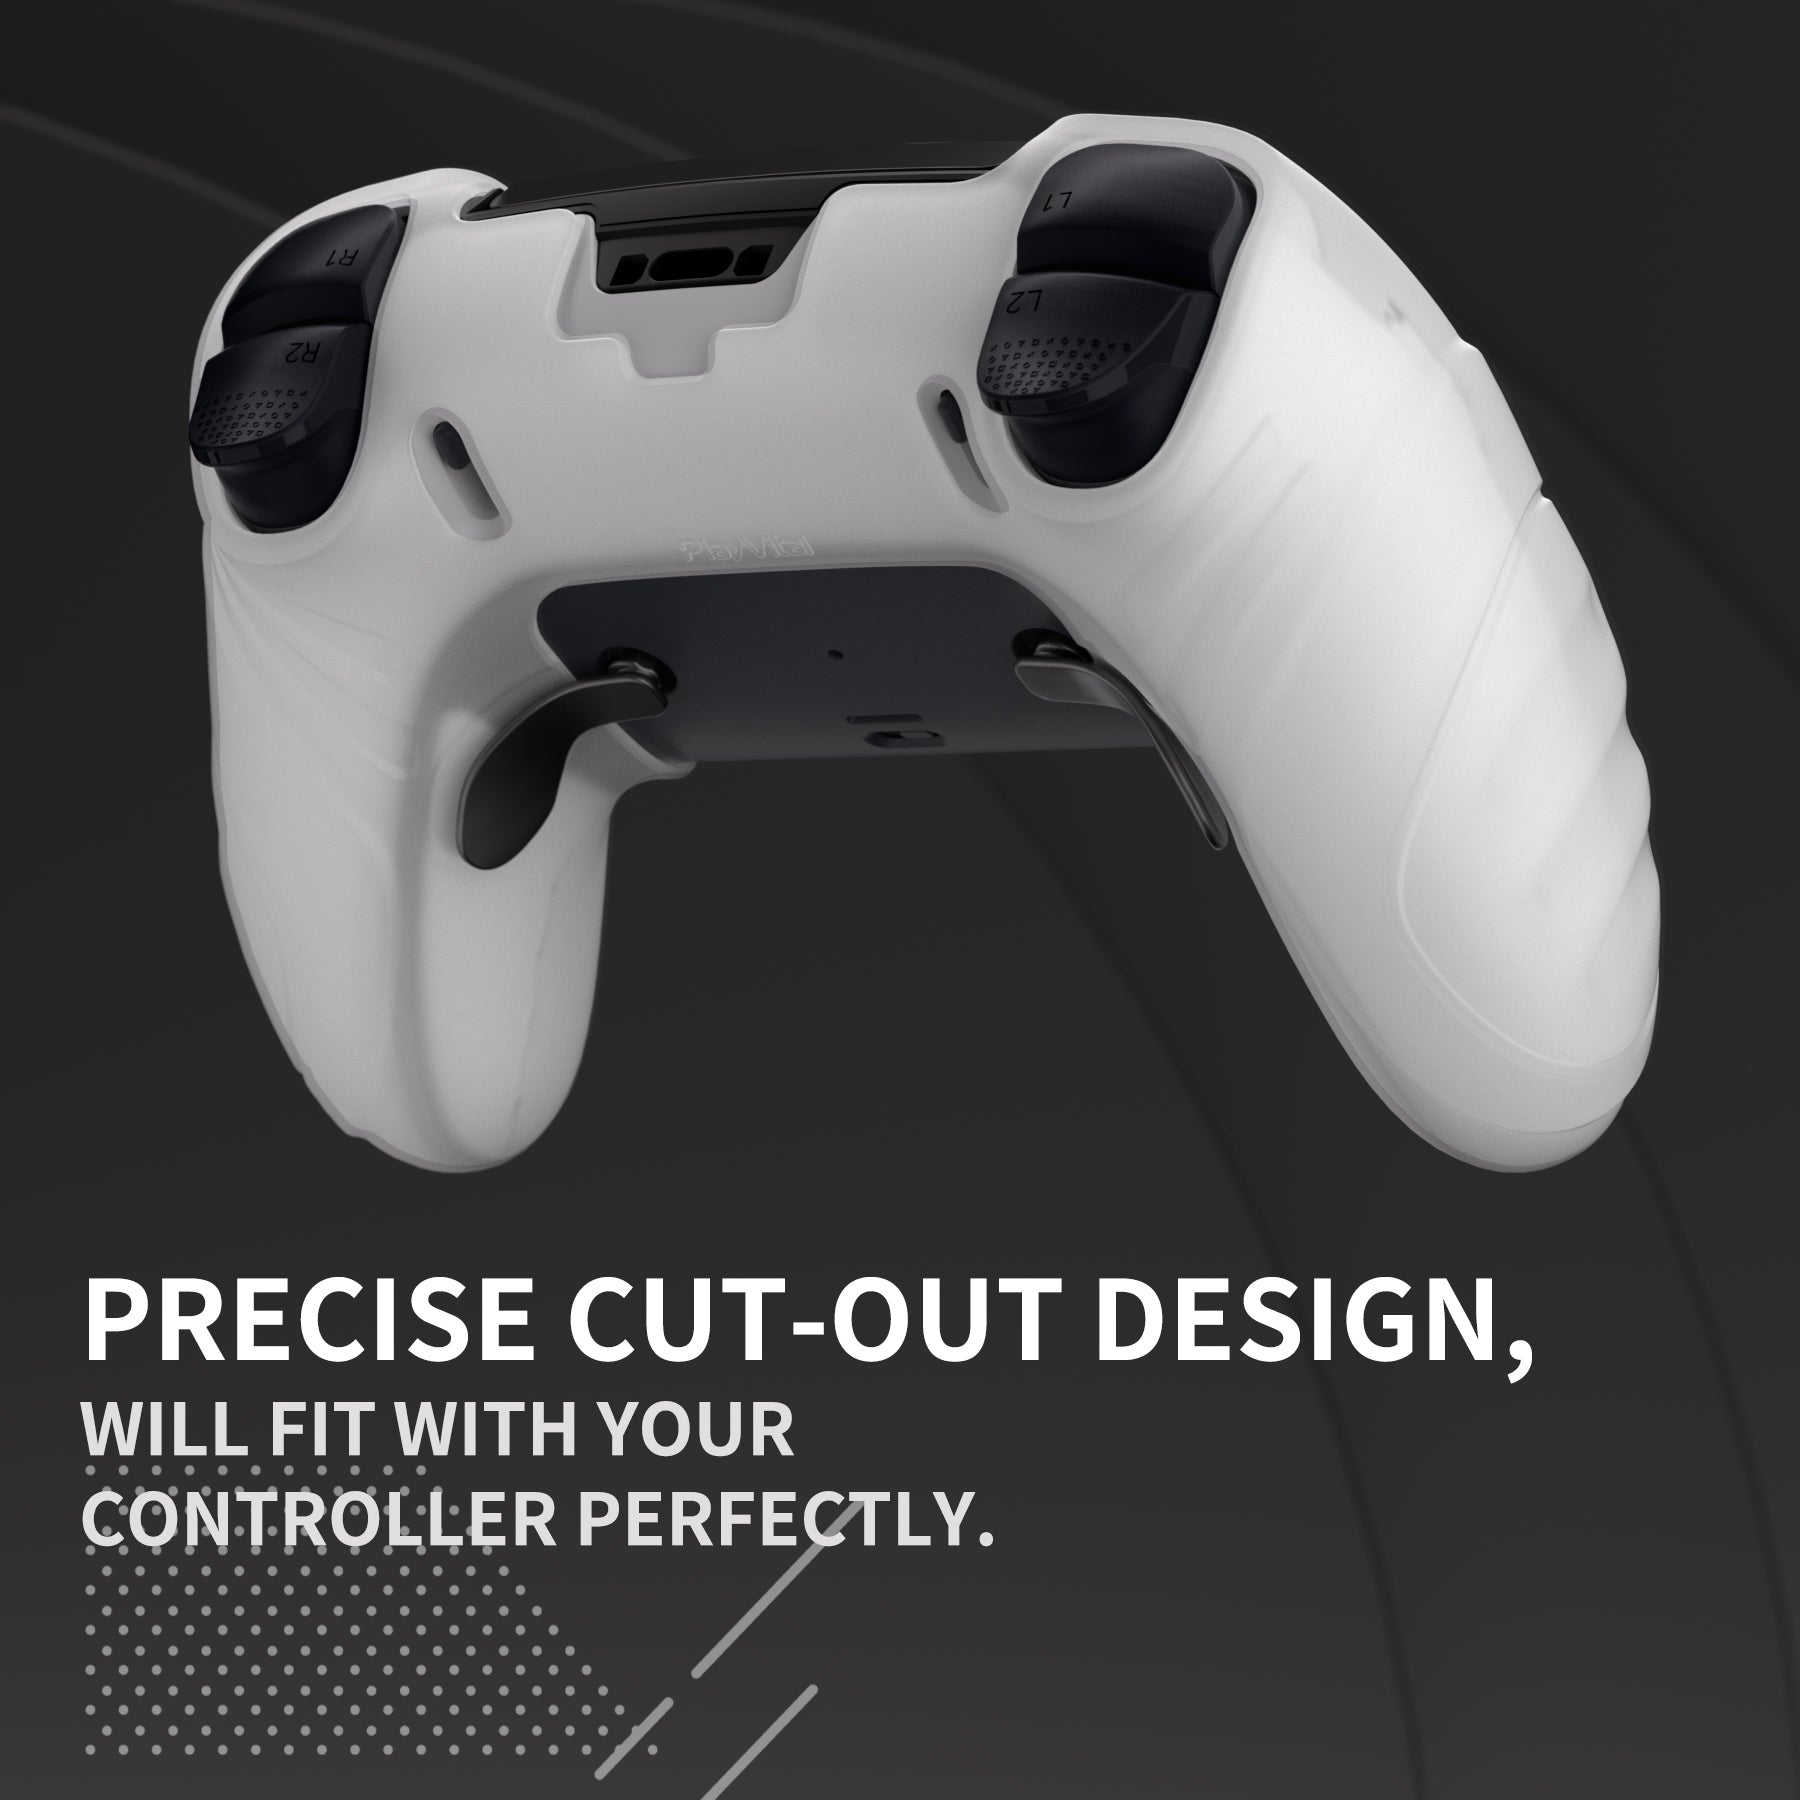 PlayVital Guardian Edition Anti-Slip Ergonomic Silicone Cover Case with Thumb Grip Caps for PS5 Edge Controller - Clear White - EHPFP003 PlayVital